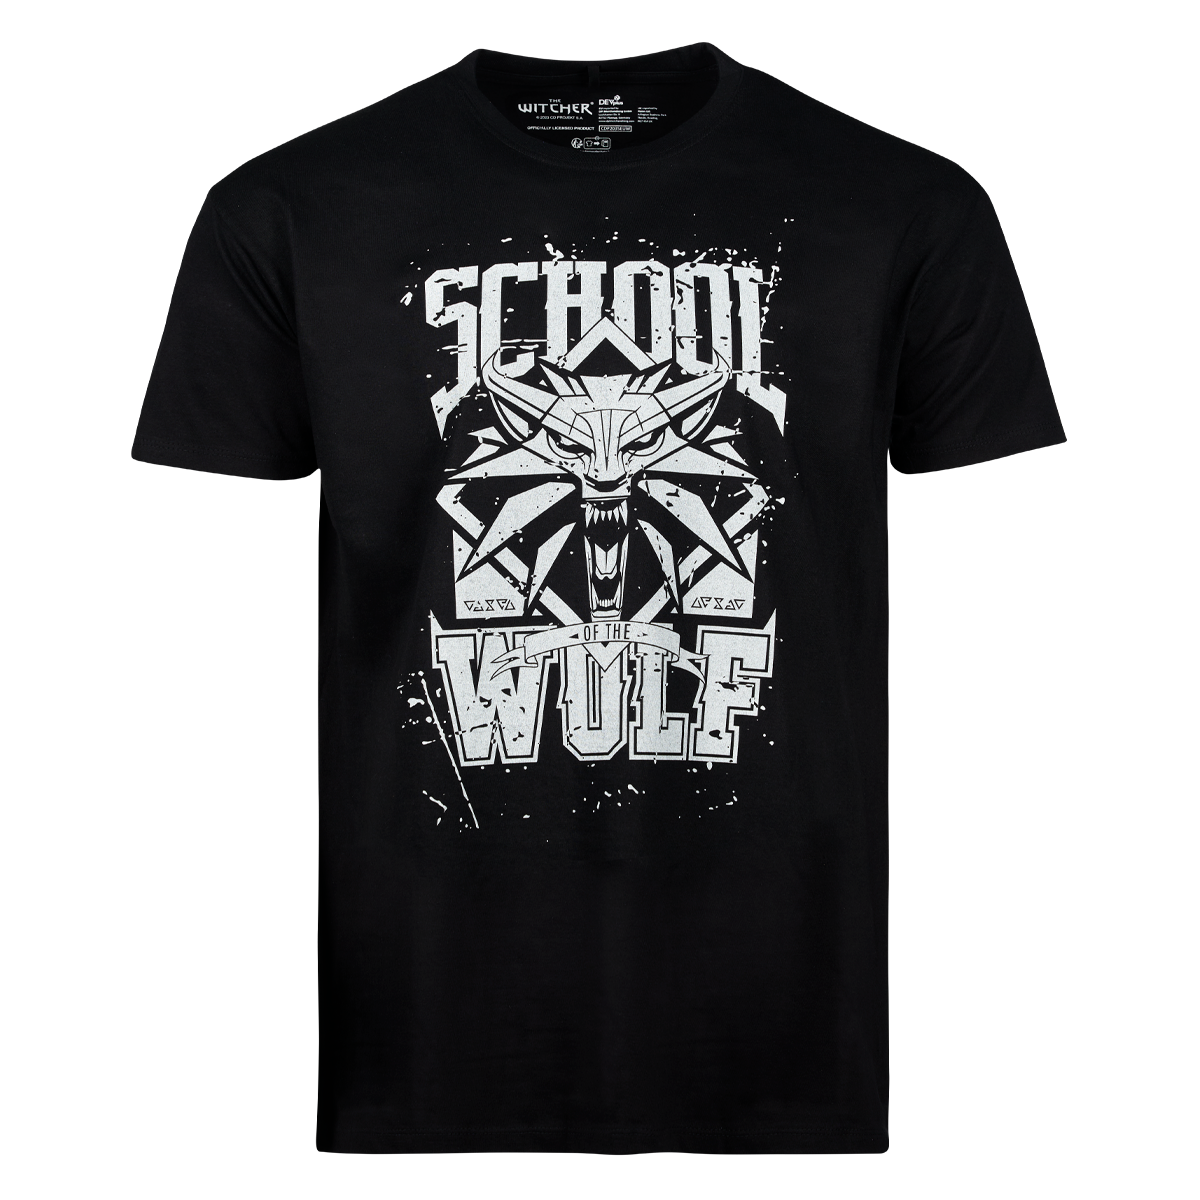 The Witcher T-Shirt "School of the Wolf" Black XL Cover